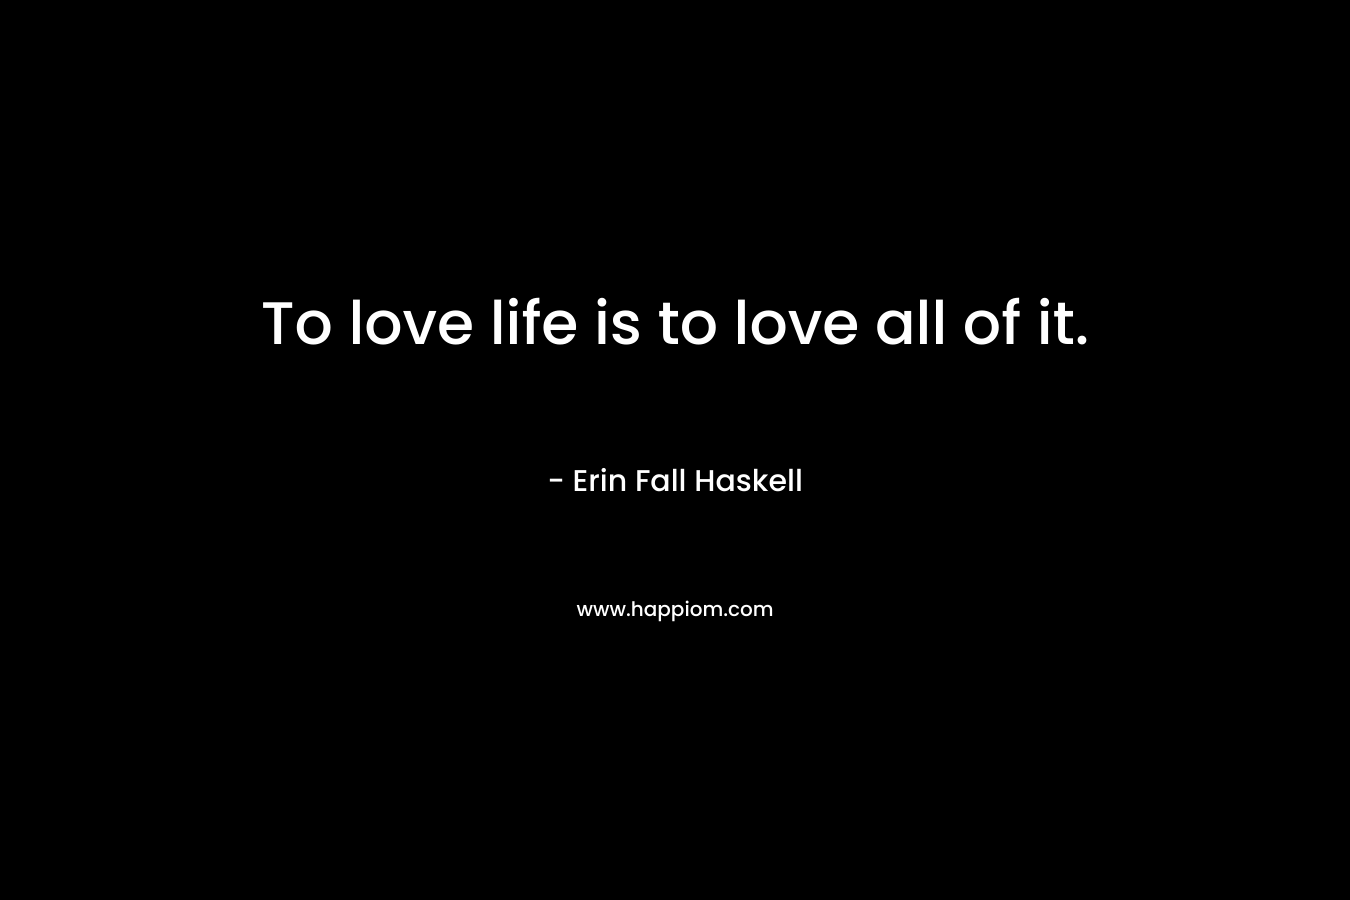 To love life is to love all of it. – Erin Fall Haskell